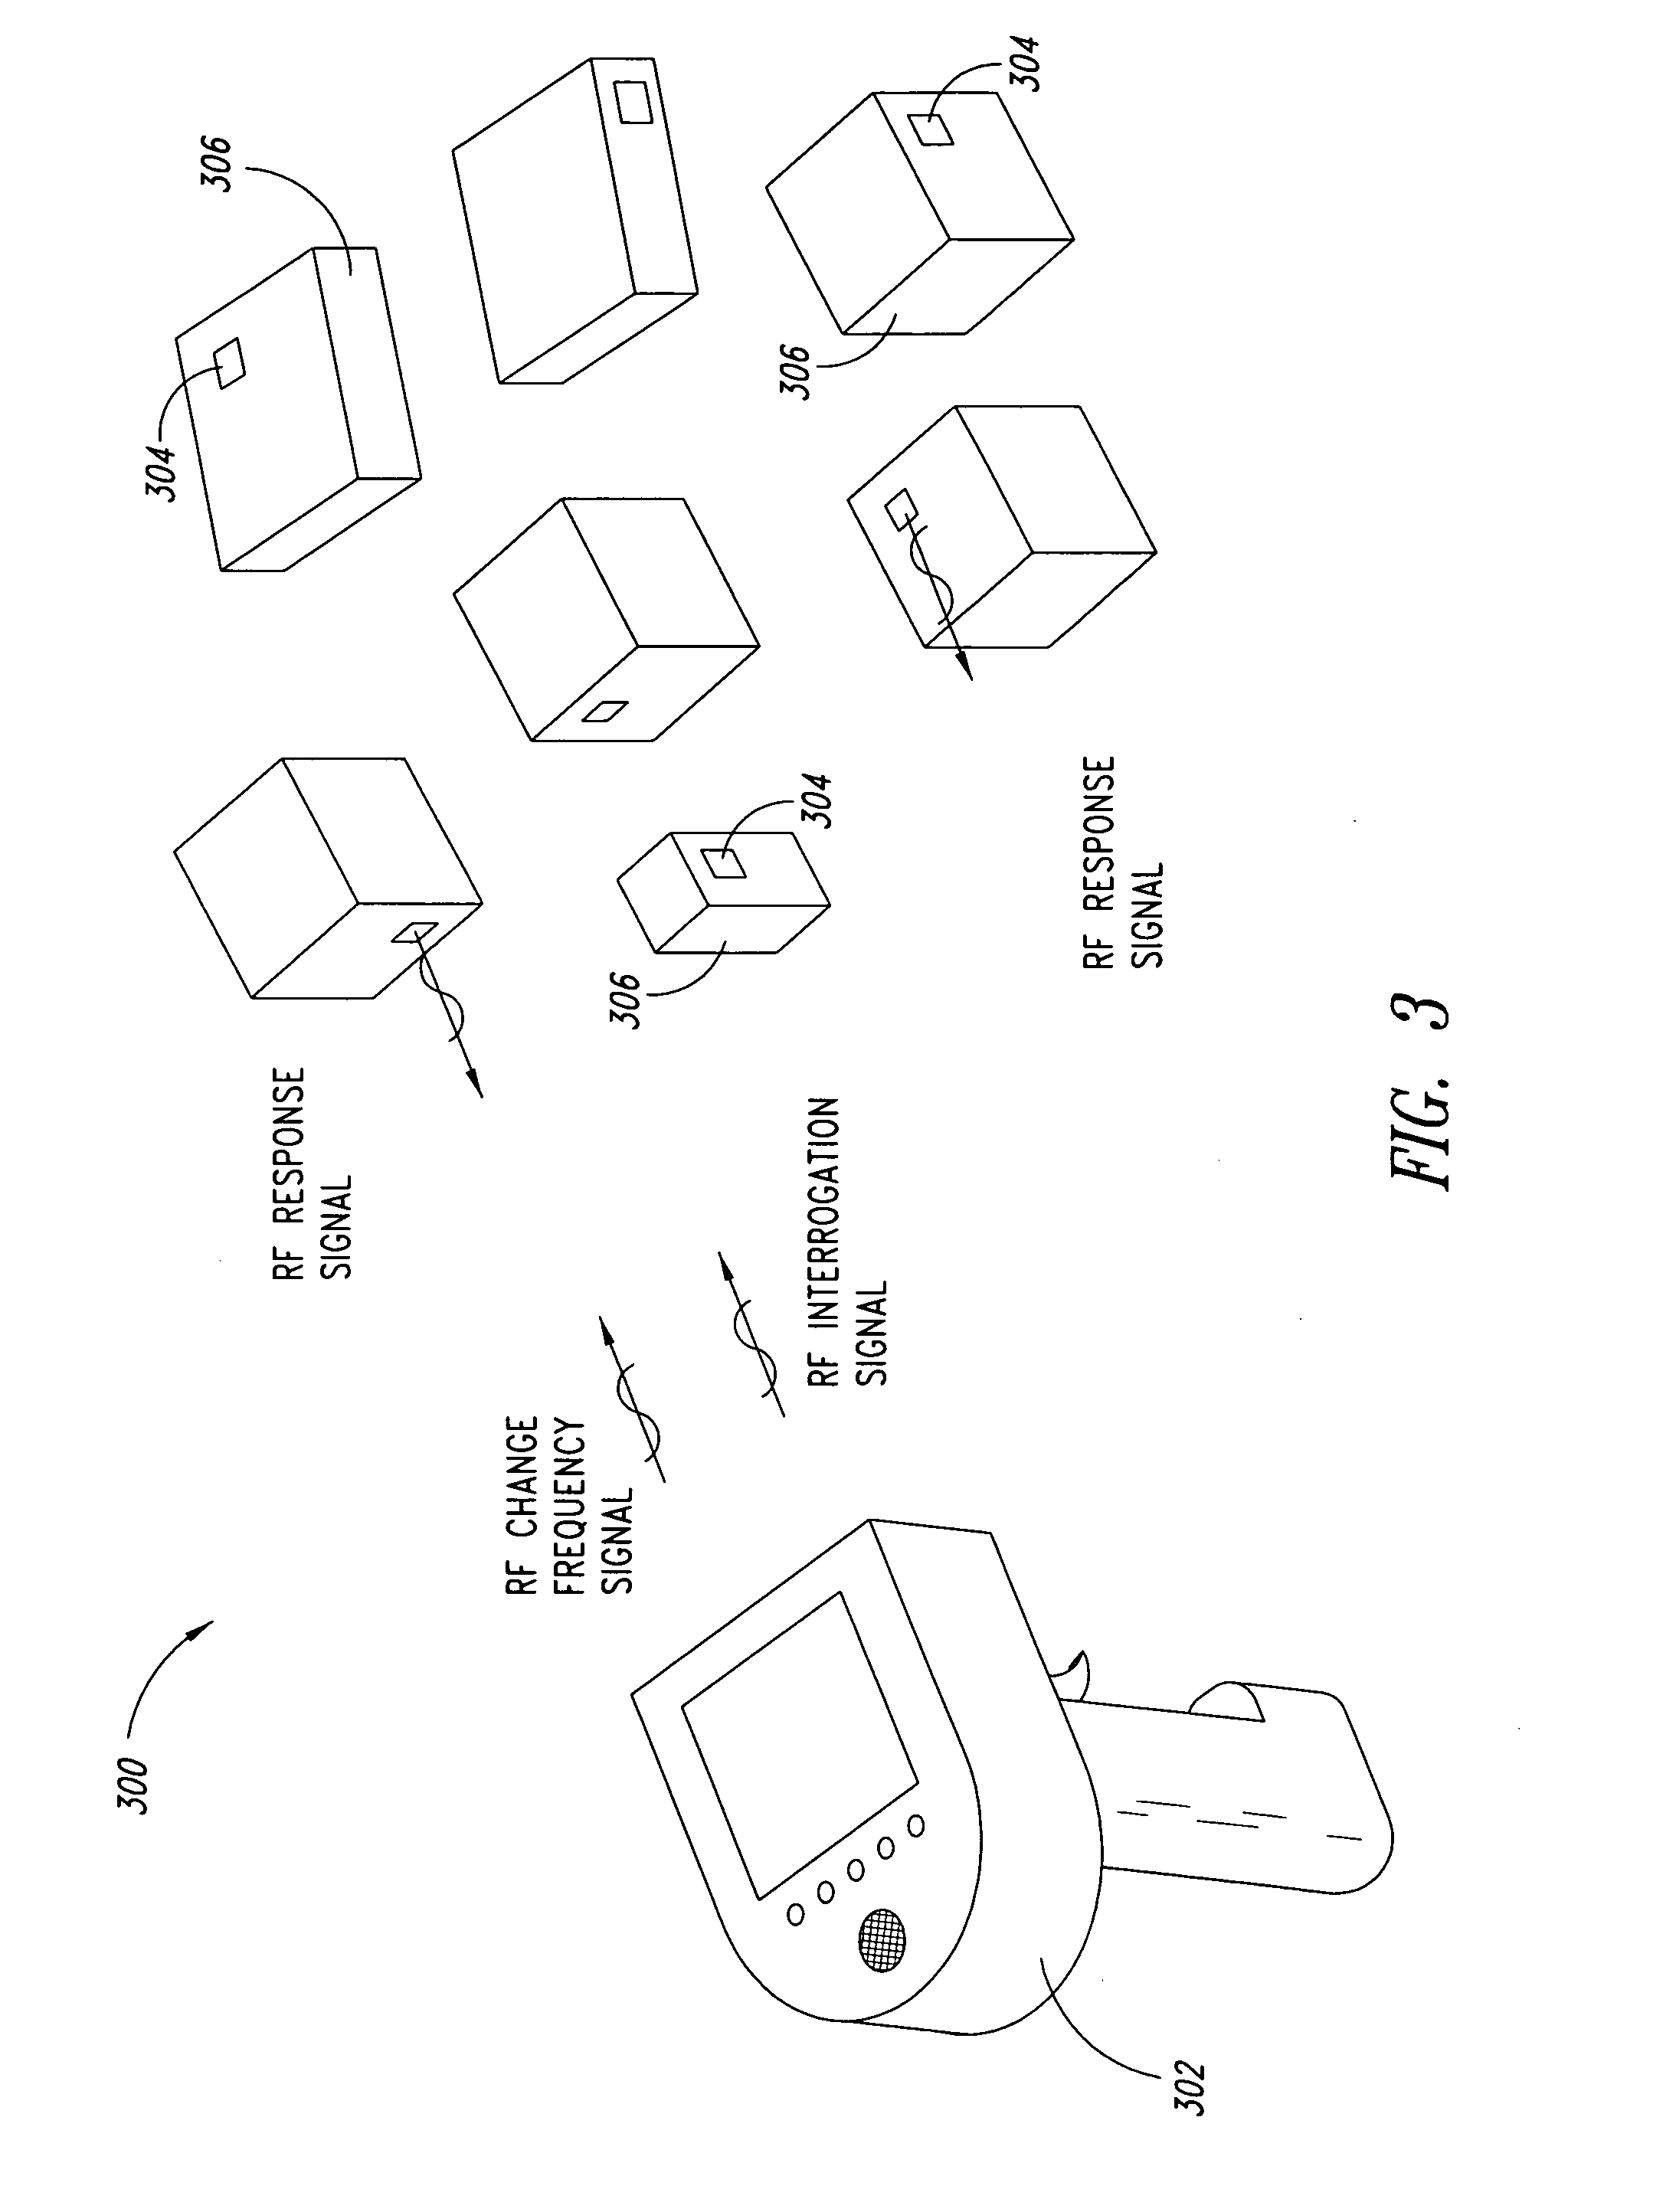 System and method of enhancing range in a radio frequency identification system